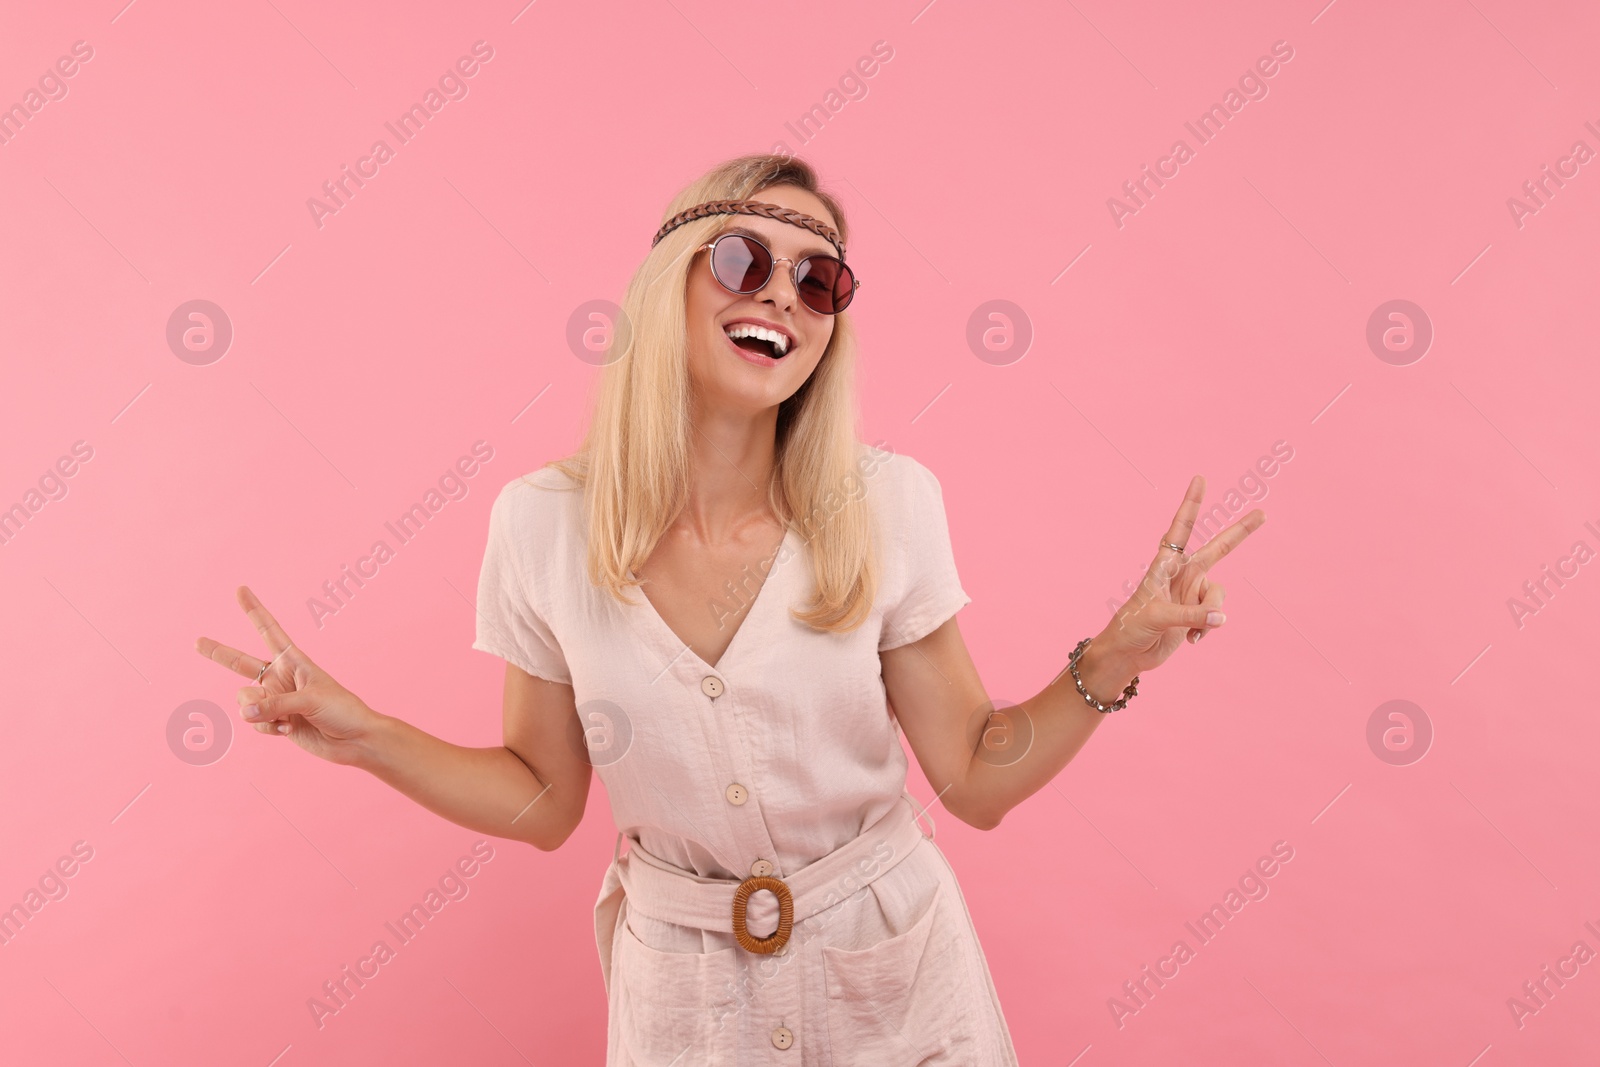 Photo of Portrait of smiling hippie woman showing peace signs on pink background